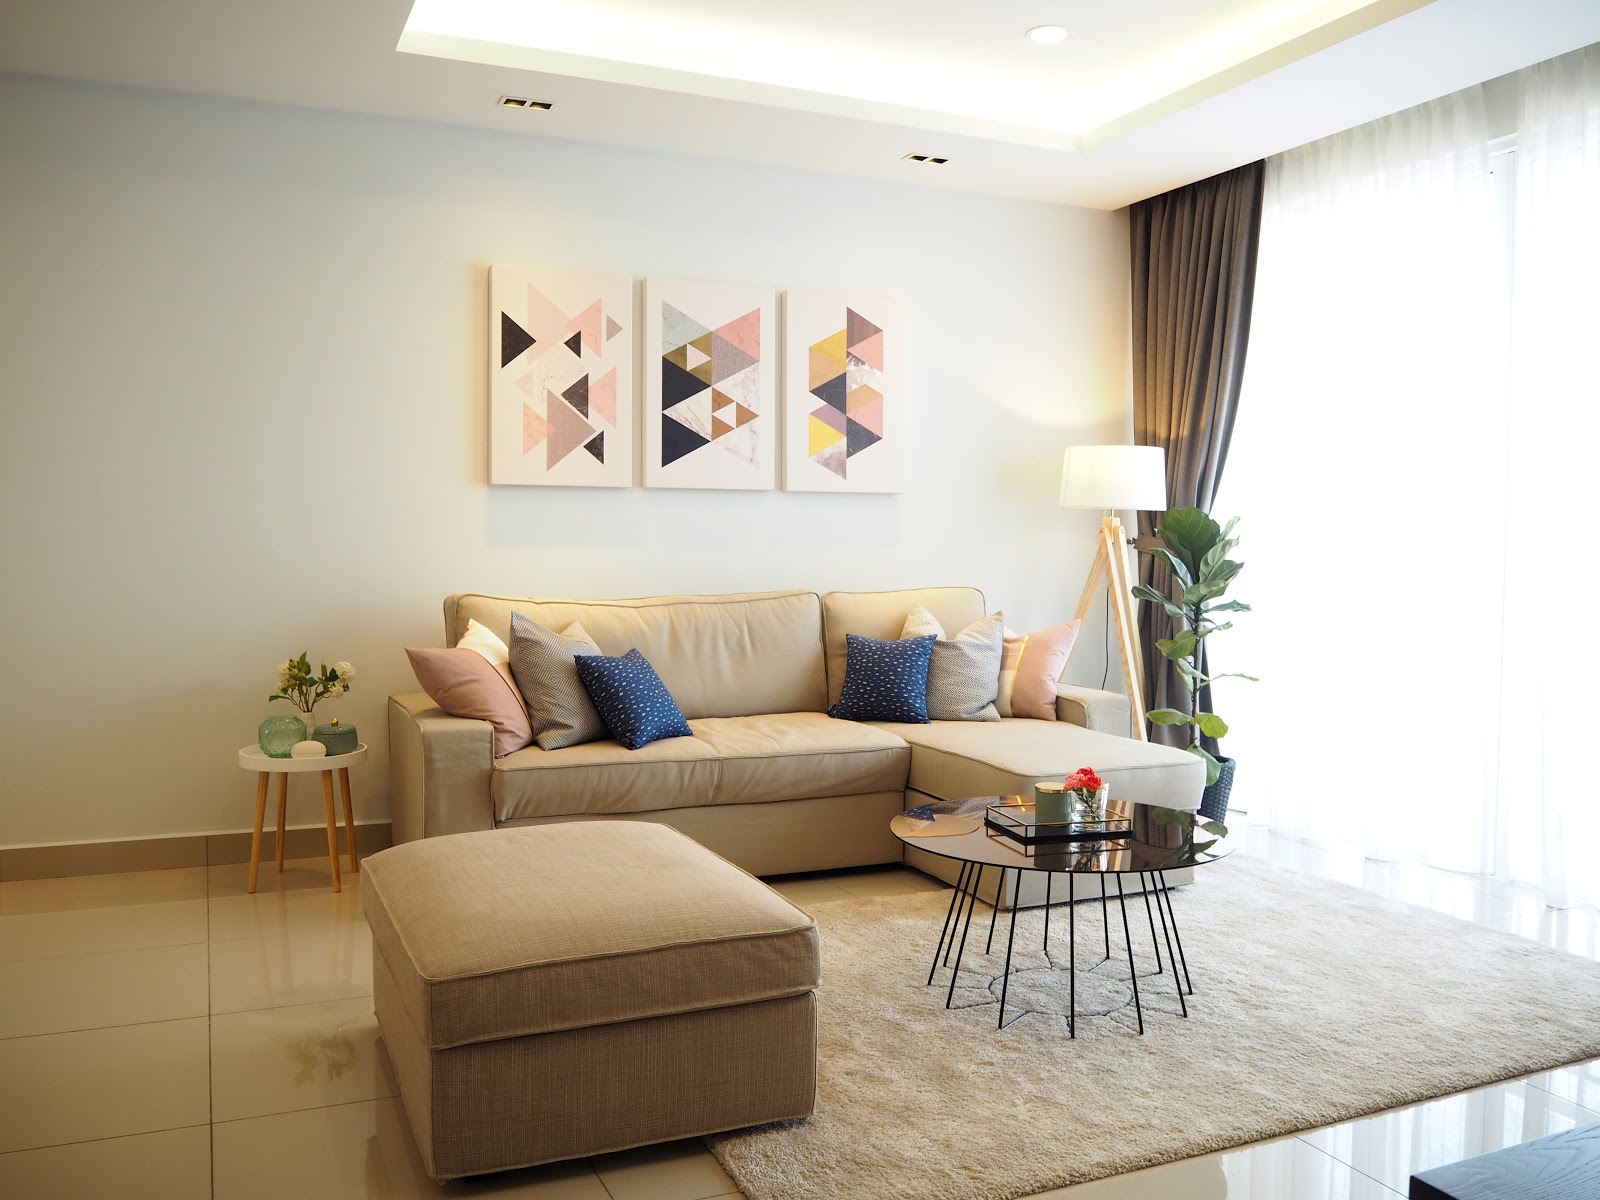 Condo in Cheras. Project by Meridian Inspiration